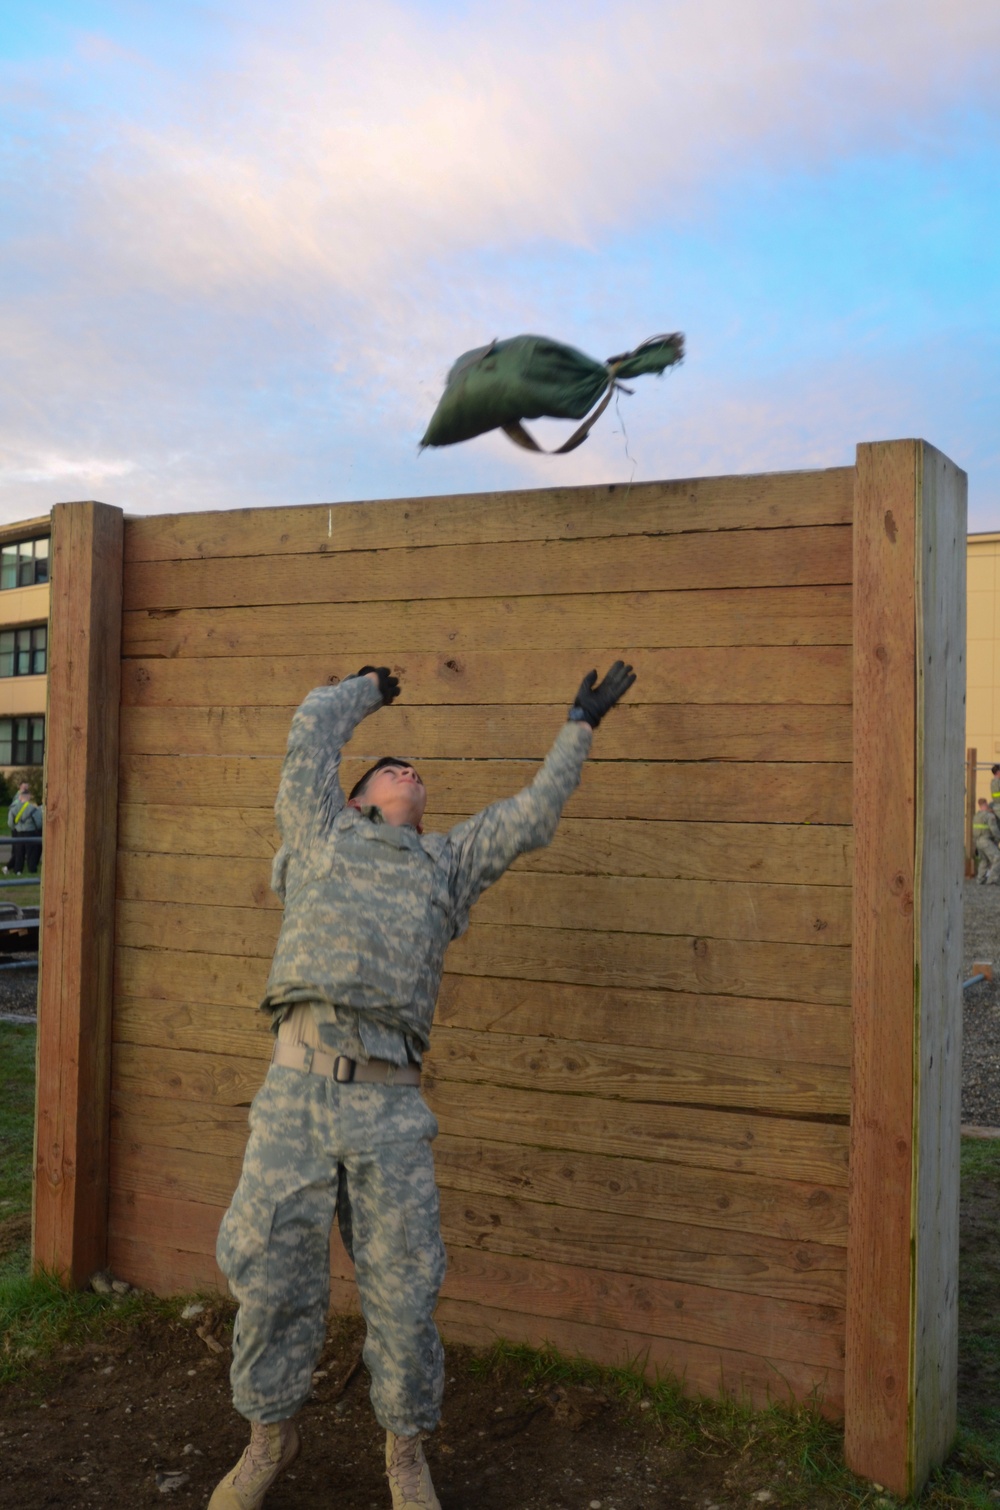 Sandbags and body armor: Arrowhead Soldiers compete in Iron Patriot competition